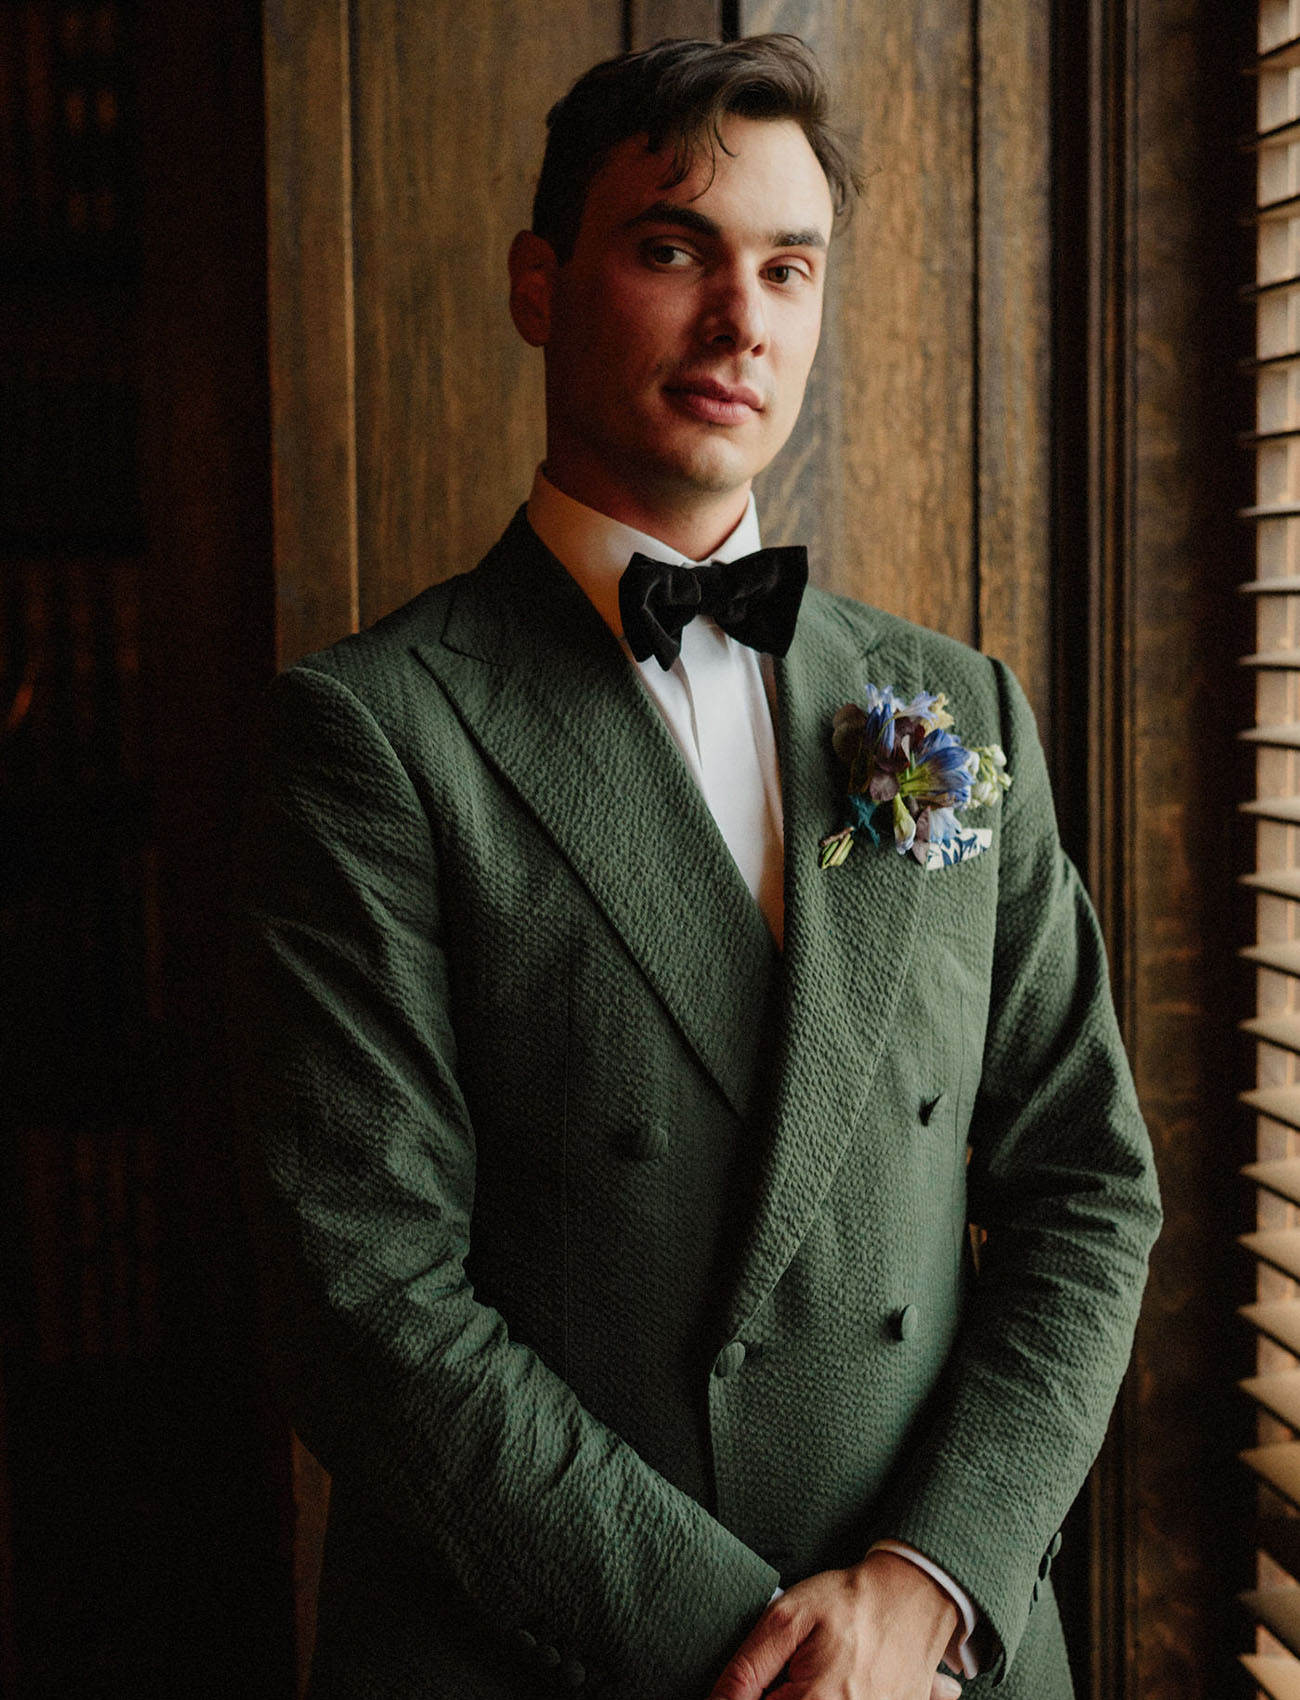 The groom was rocking a creative green suit, a dark velvet bow tie and a bold boutonniere